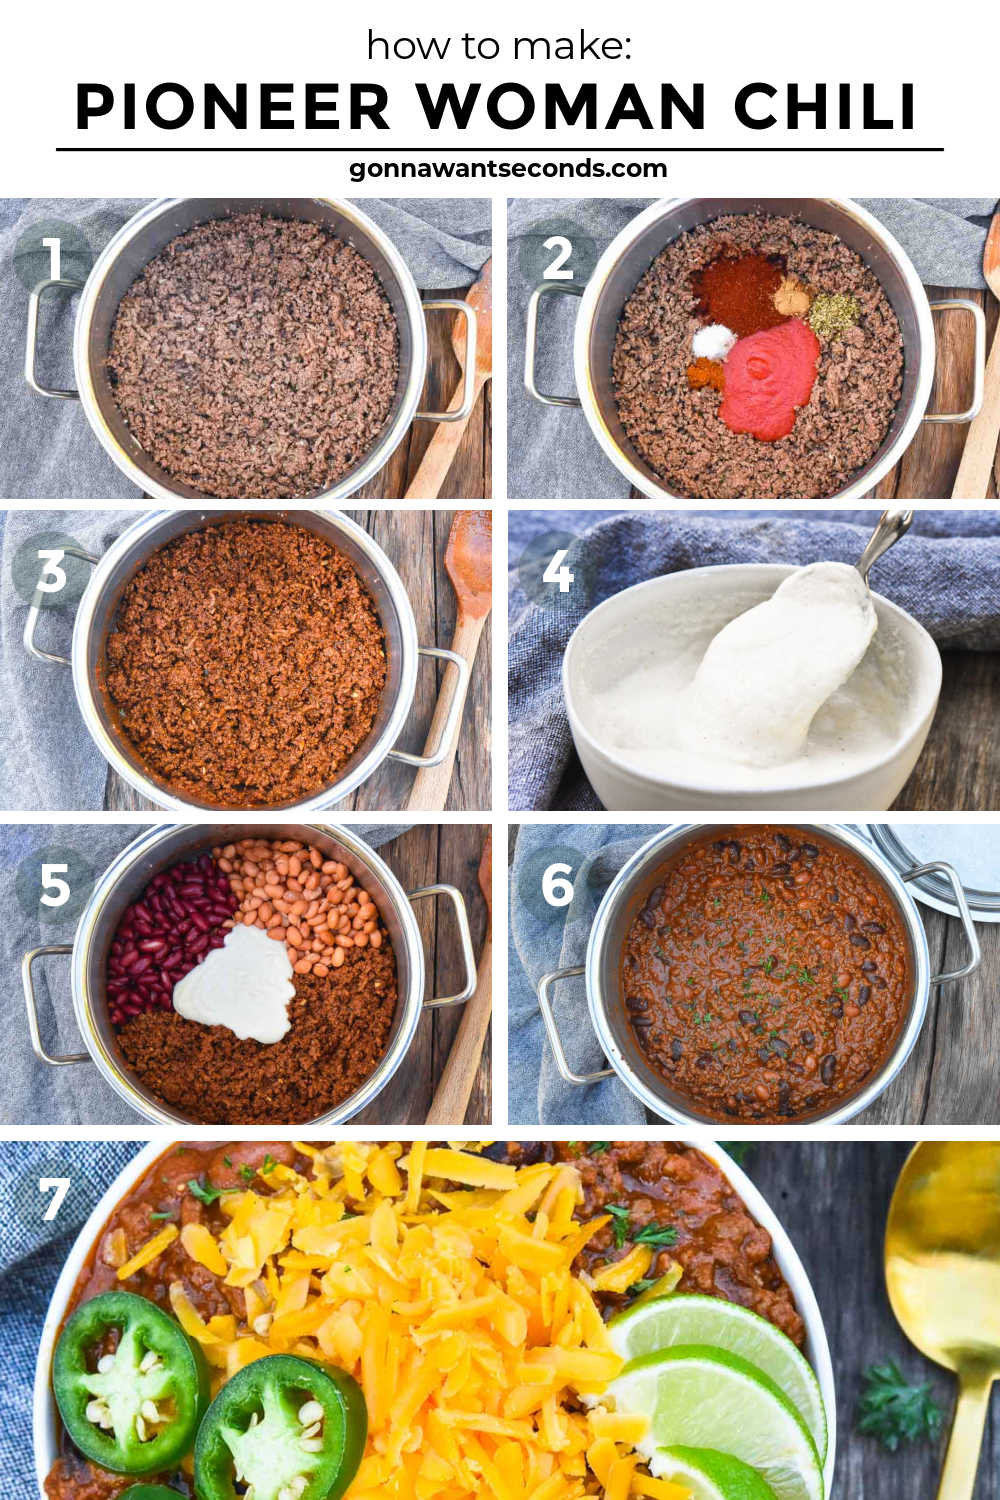 Step by step how to make Pioneer Woman Chili